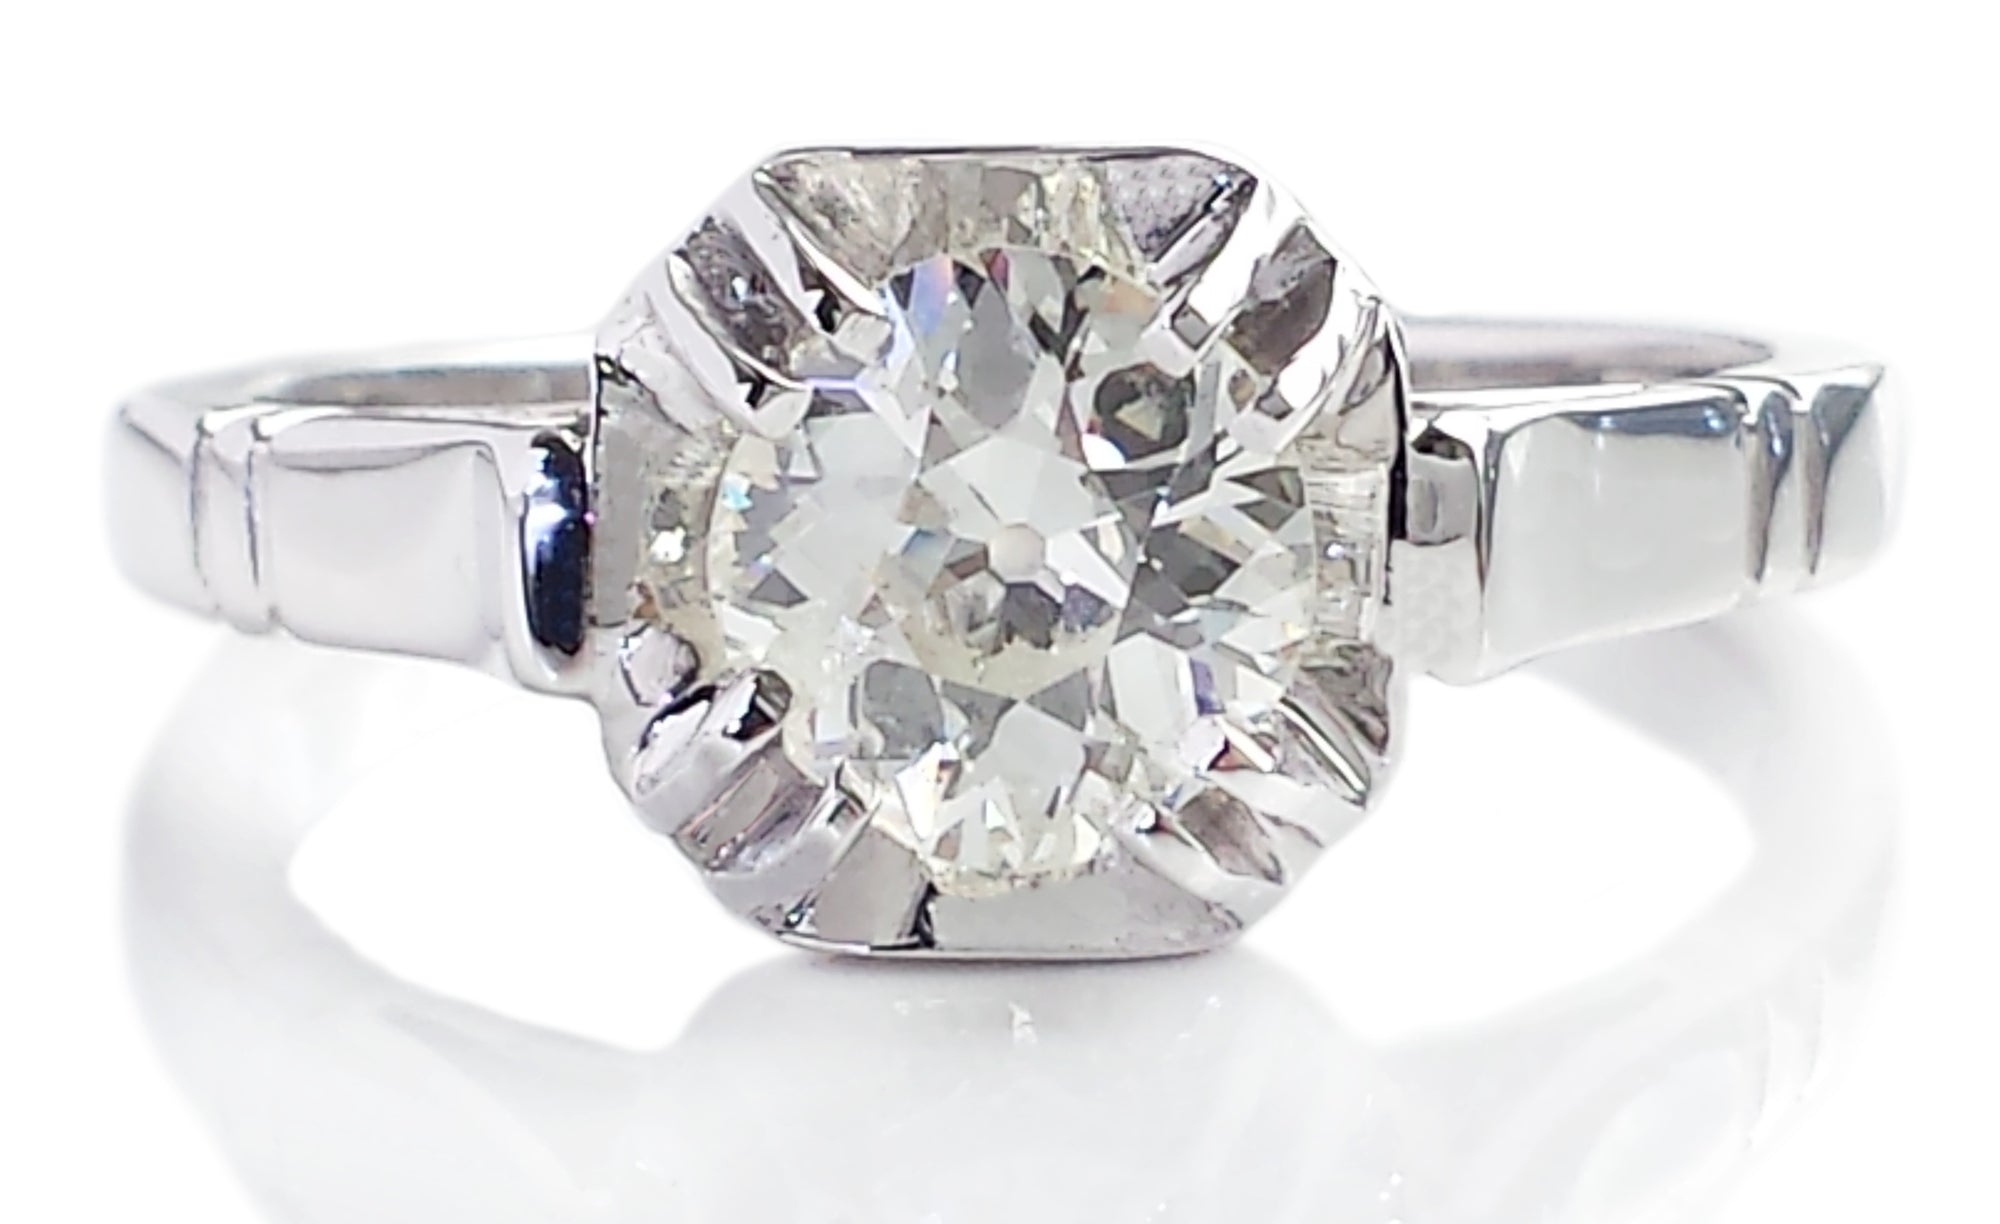 Antique 1920s French 0.92ct H/SI2 Old European Cut Diamond Engagement Ring